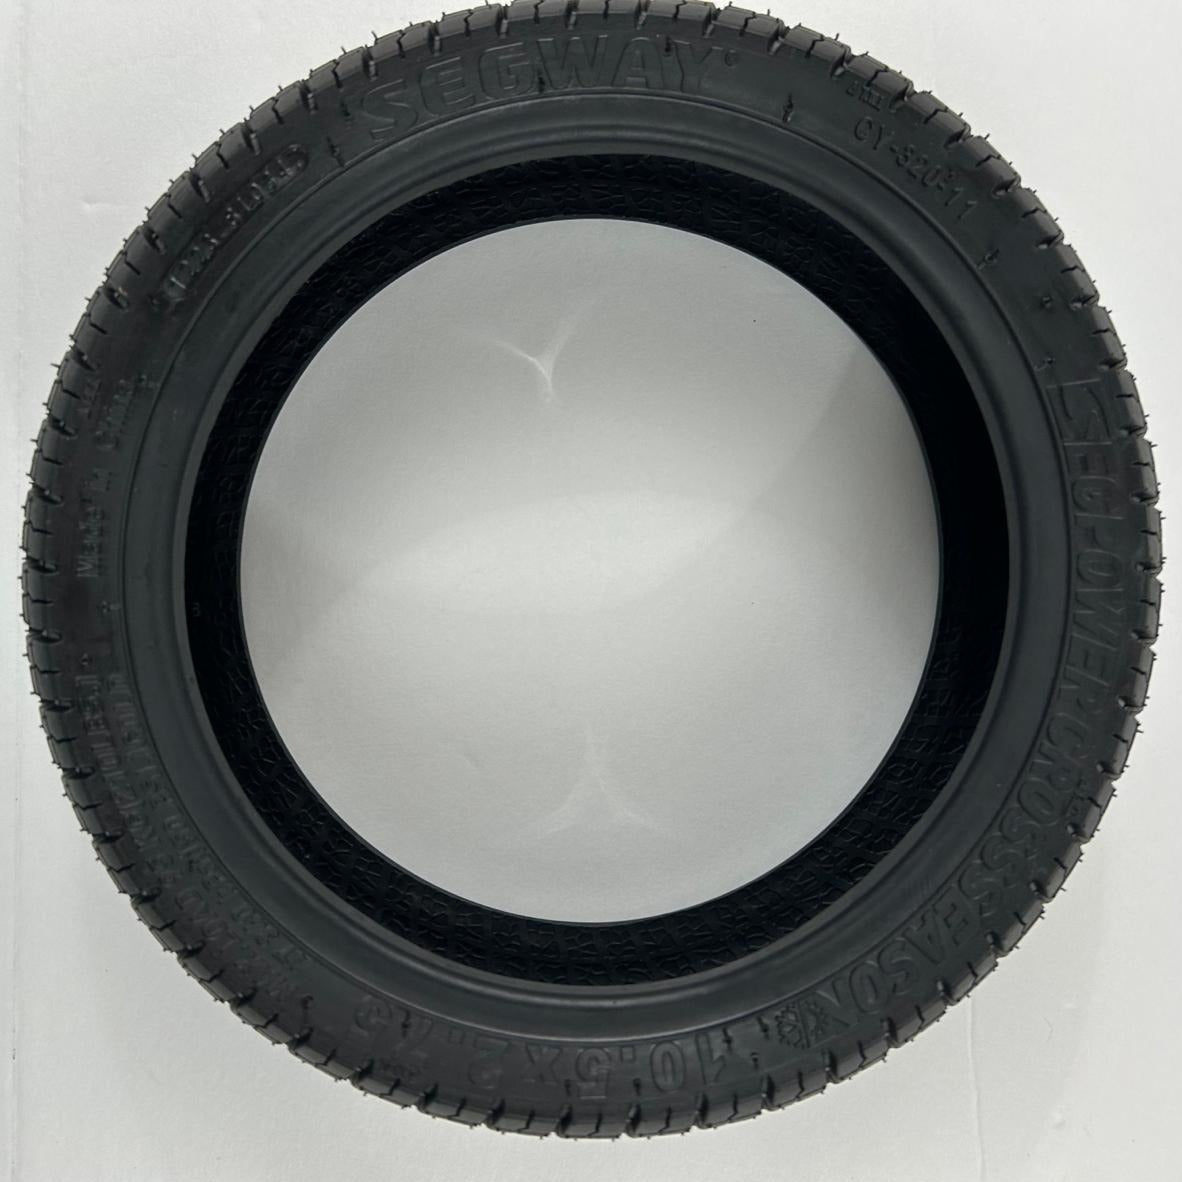 Replacement tire for Segway Ninebot Kick Scooter P (Flat Prevention)